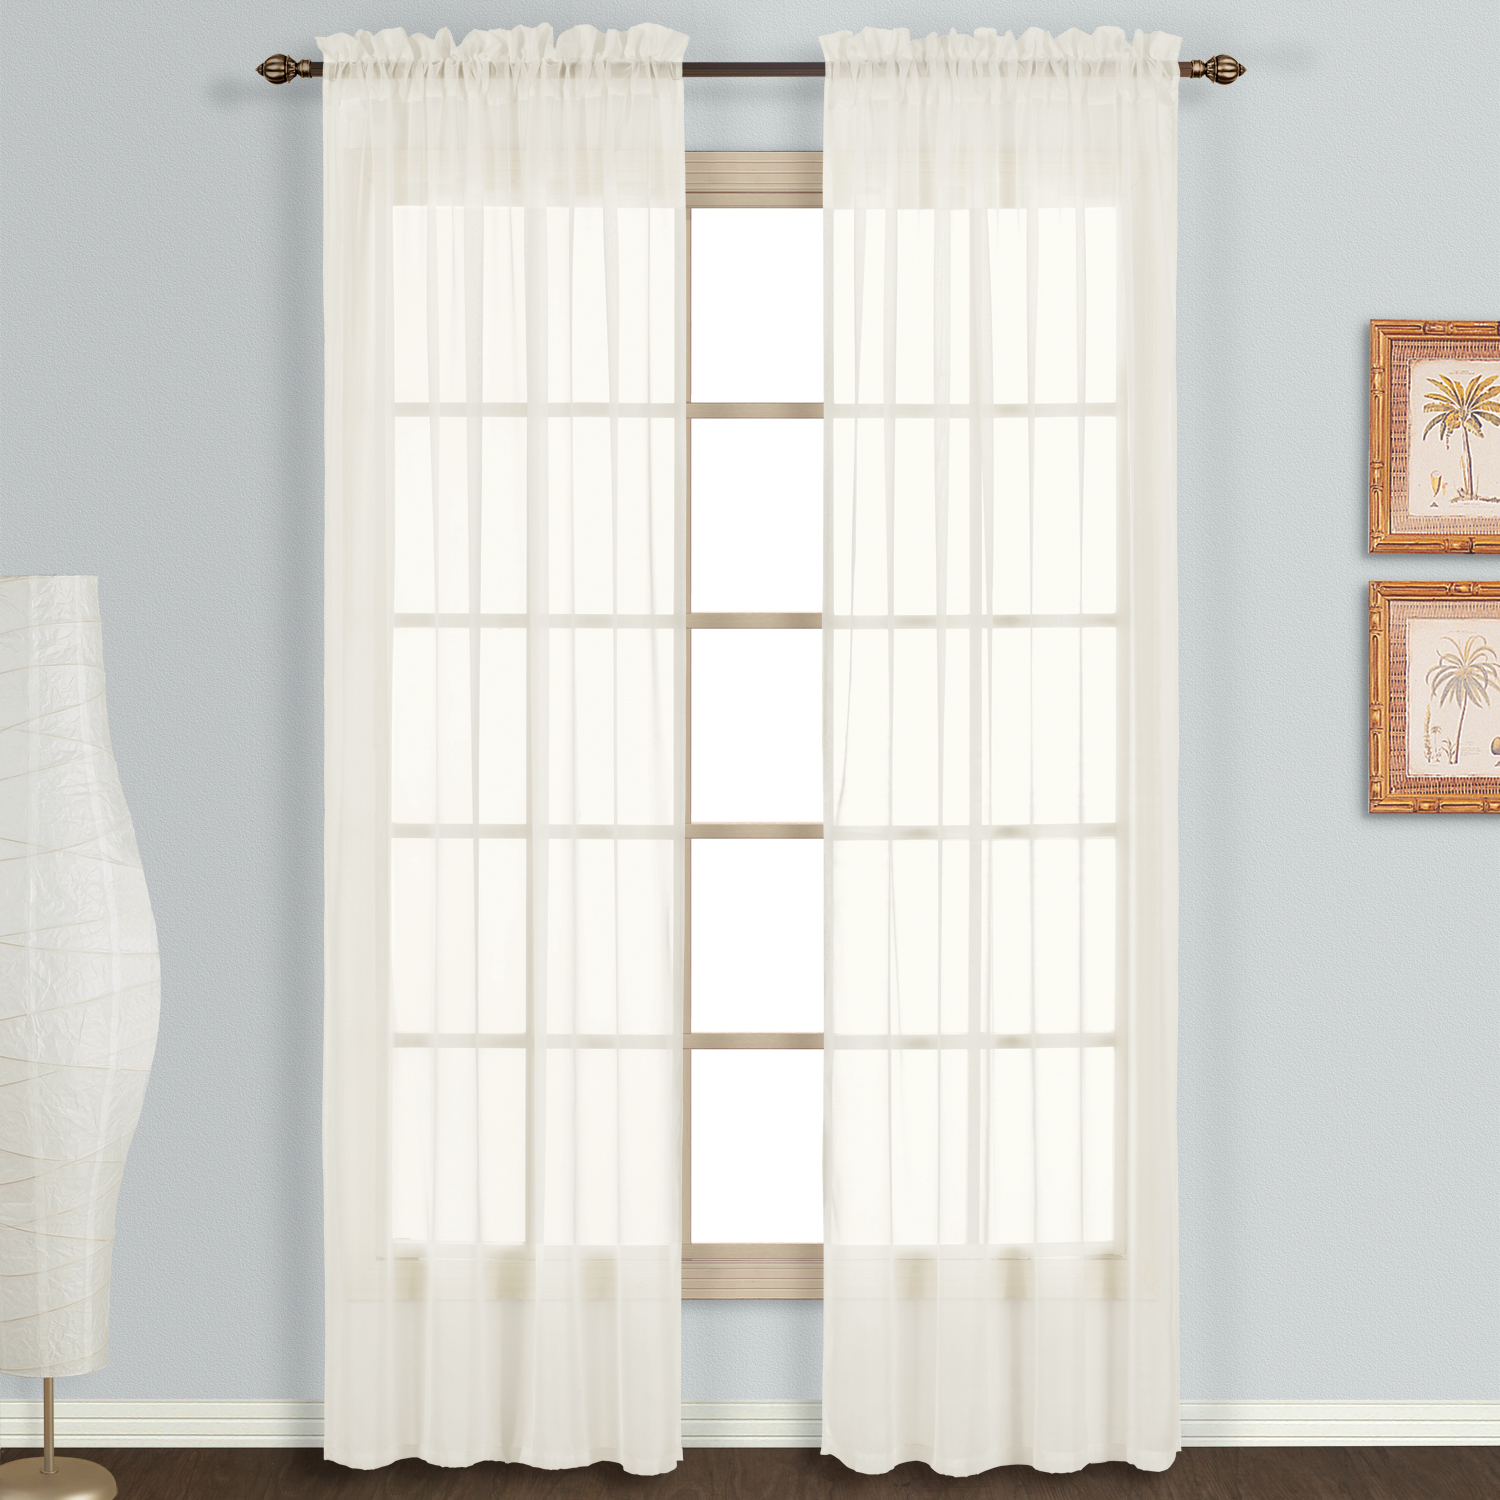 United Curtain Company Monte Carlo 118" x 63" voile window panel pair